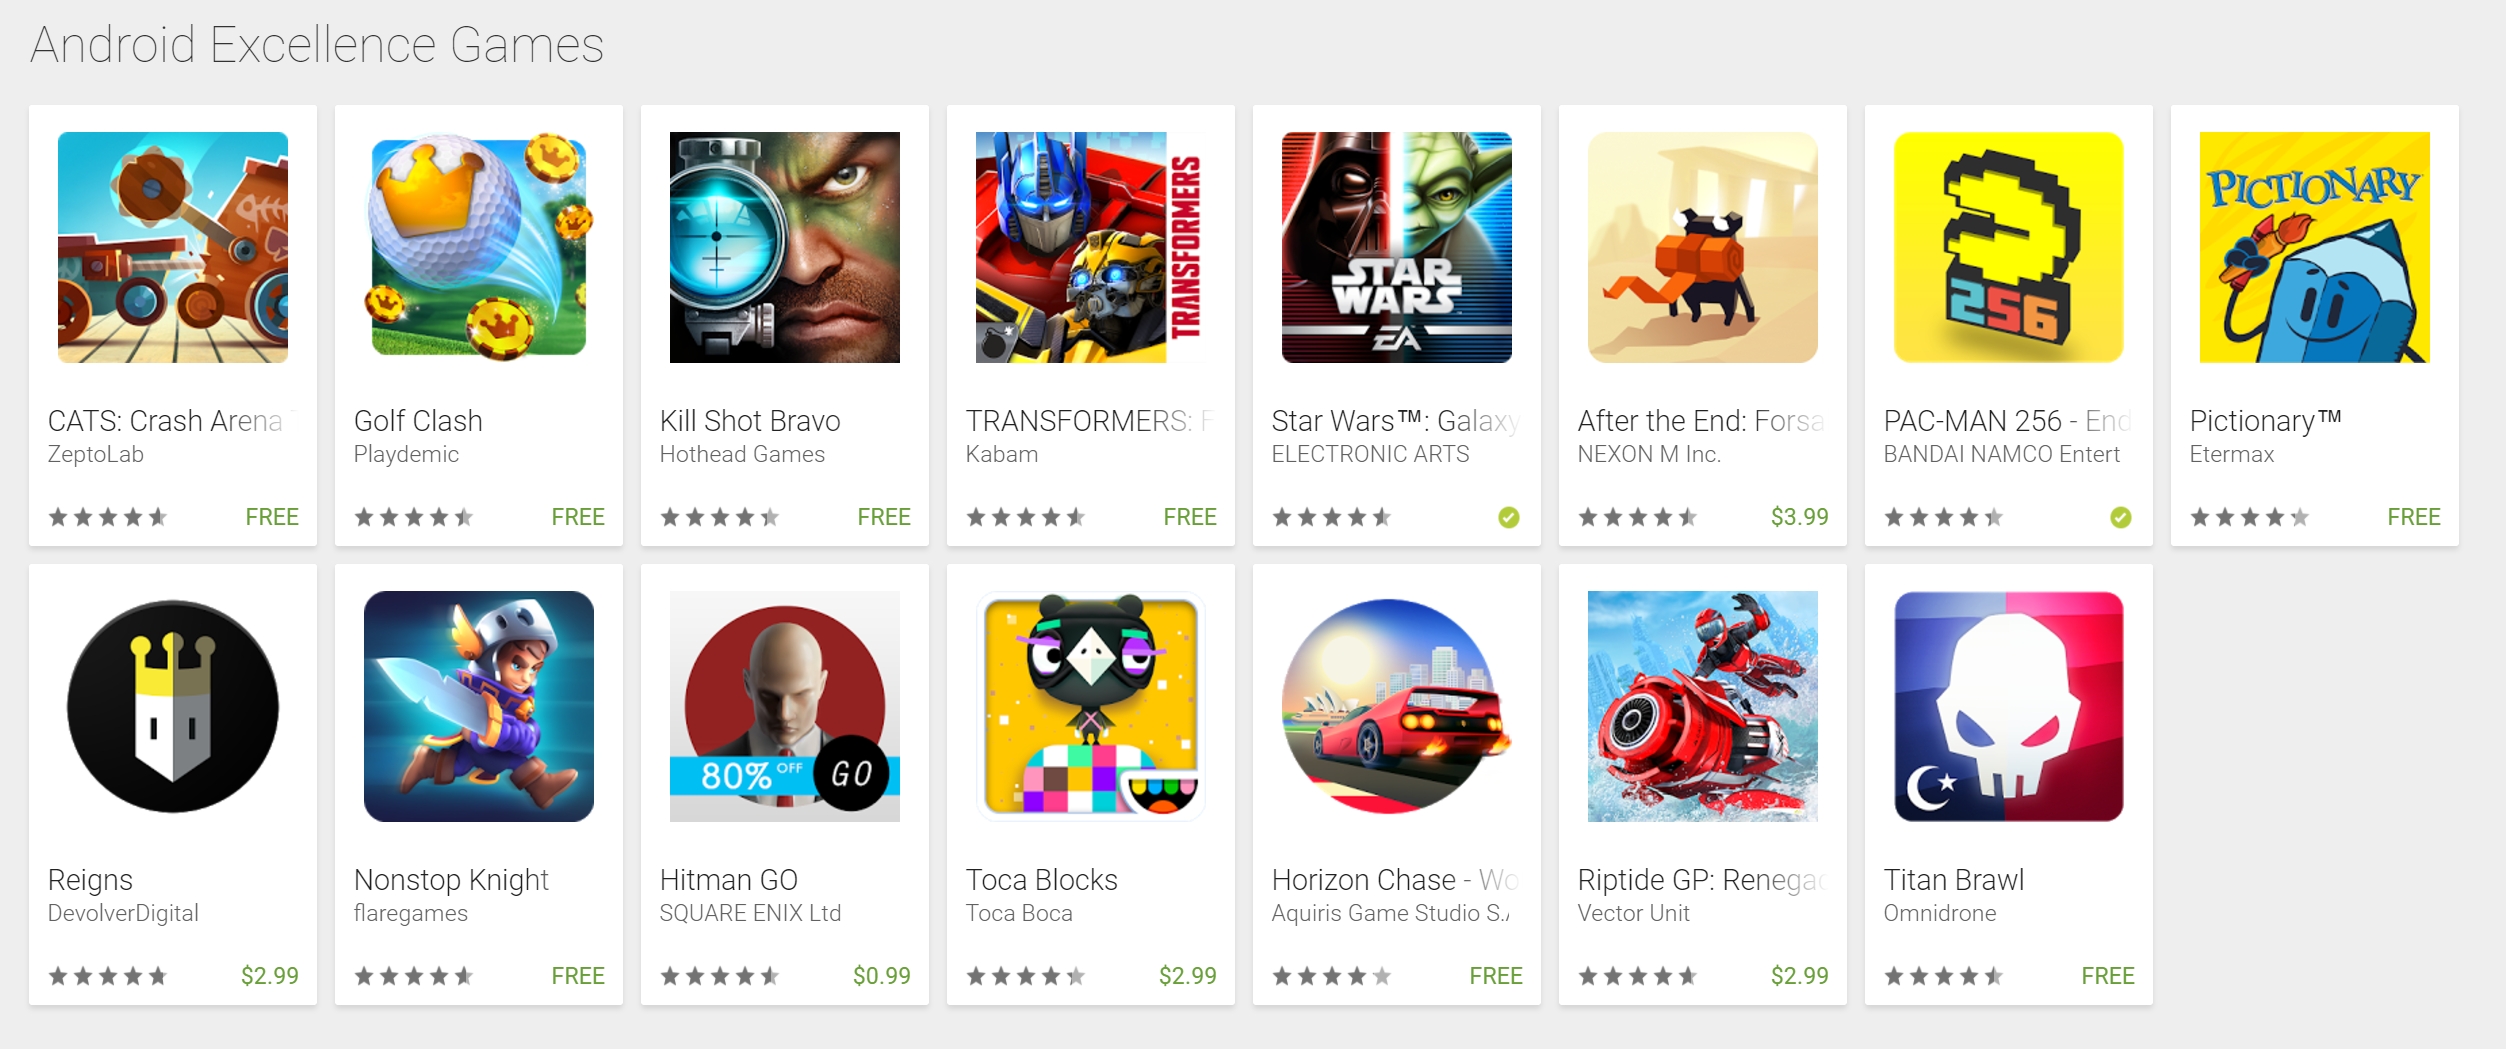 Google Play Launches Android Excellence Section Showcasing Best Apps and Games